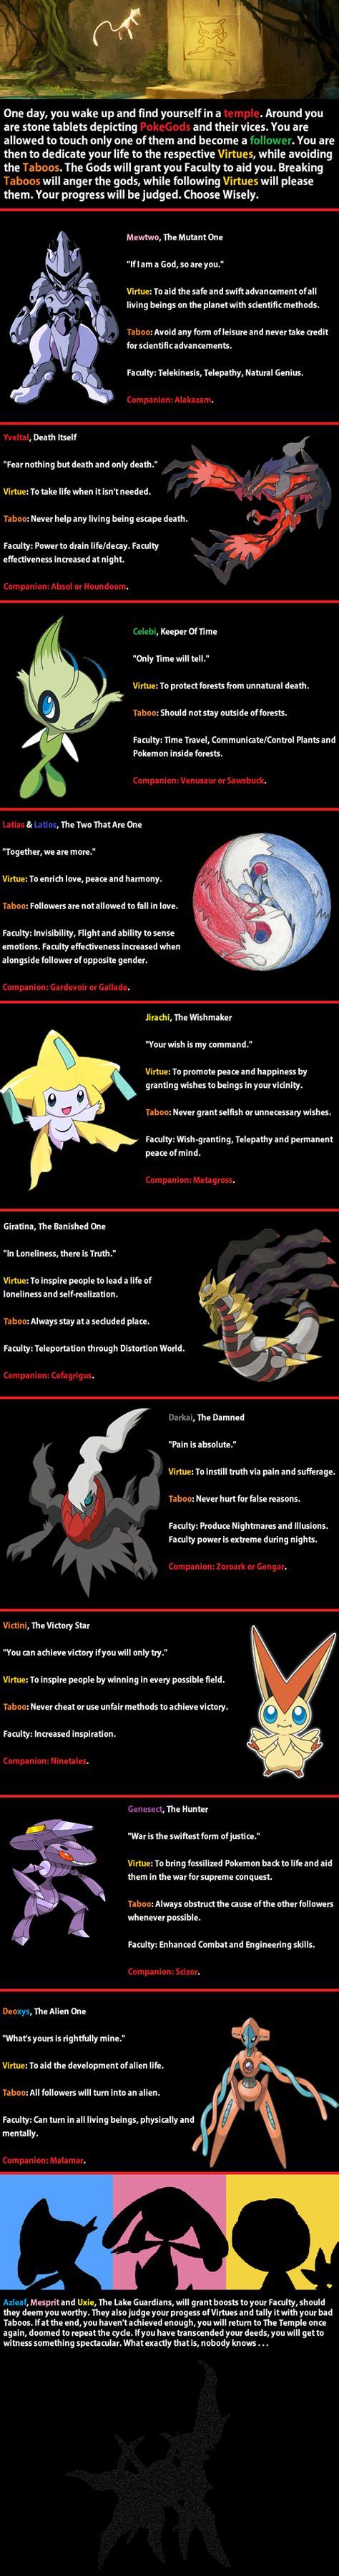 22 Pokemon Theory Ideas Pokemon Pokemon Theory Pokemon Facts